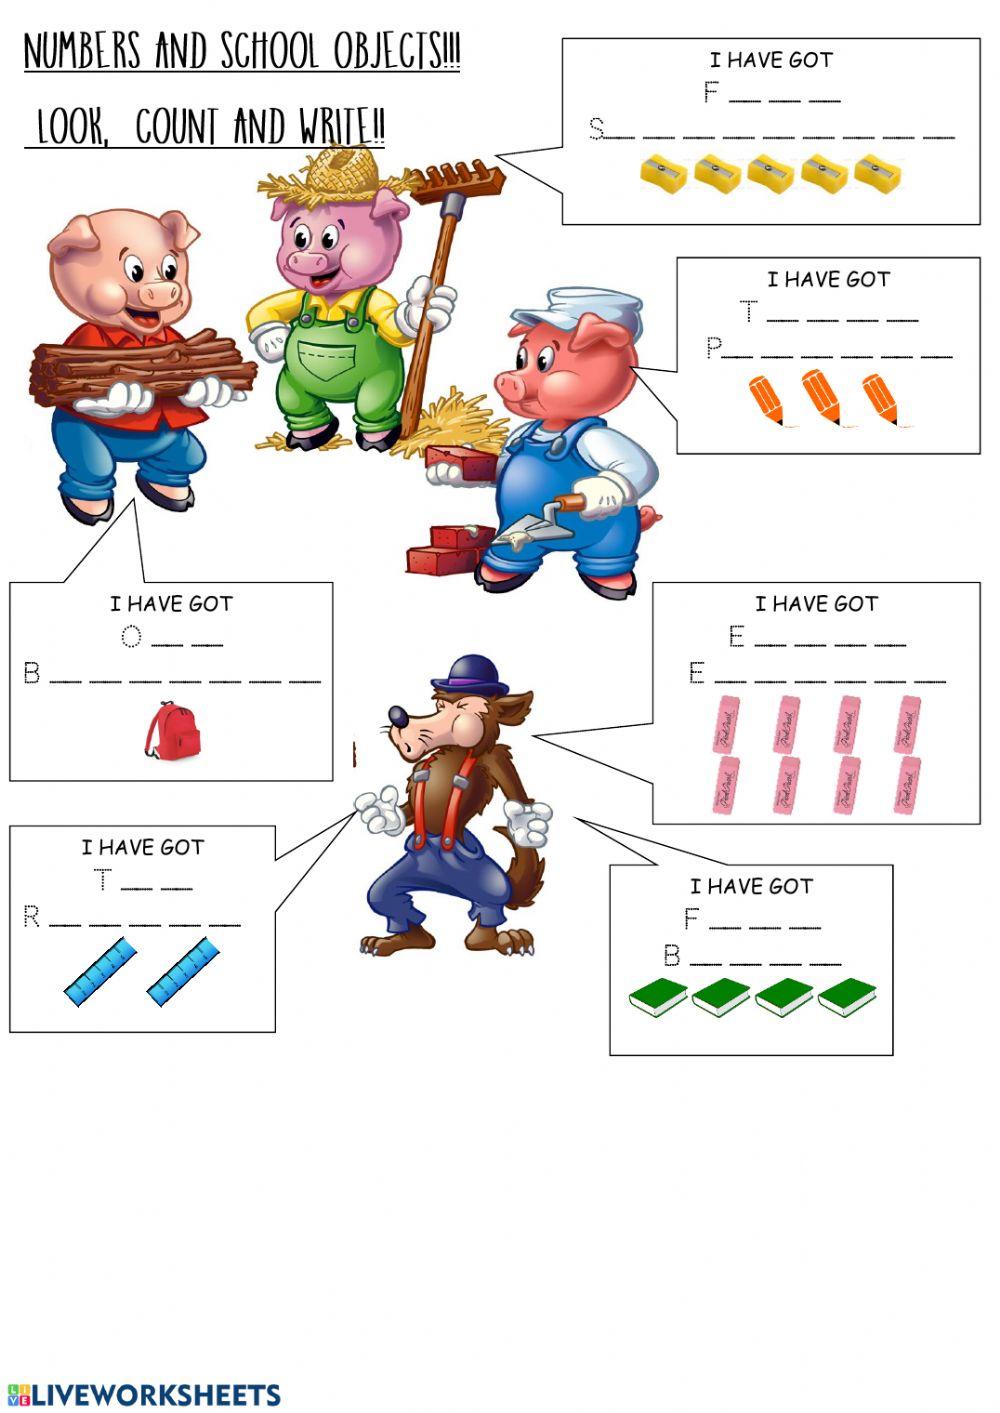 School objects and numbers - the three little pigs